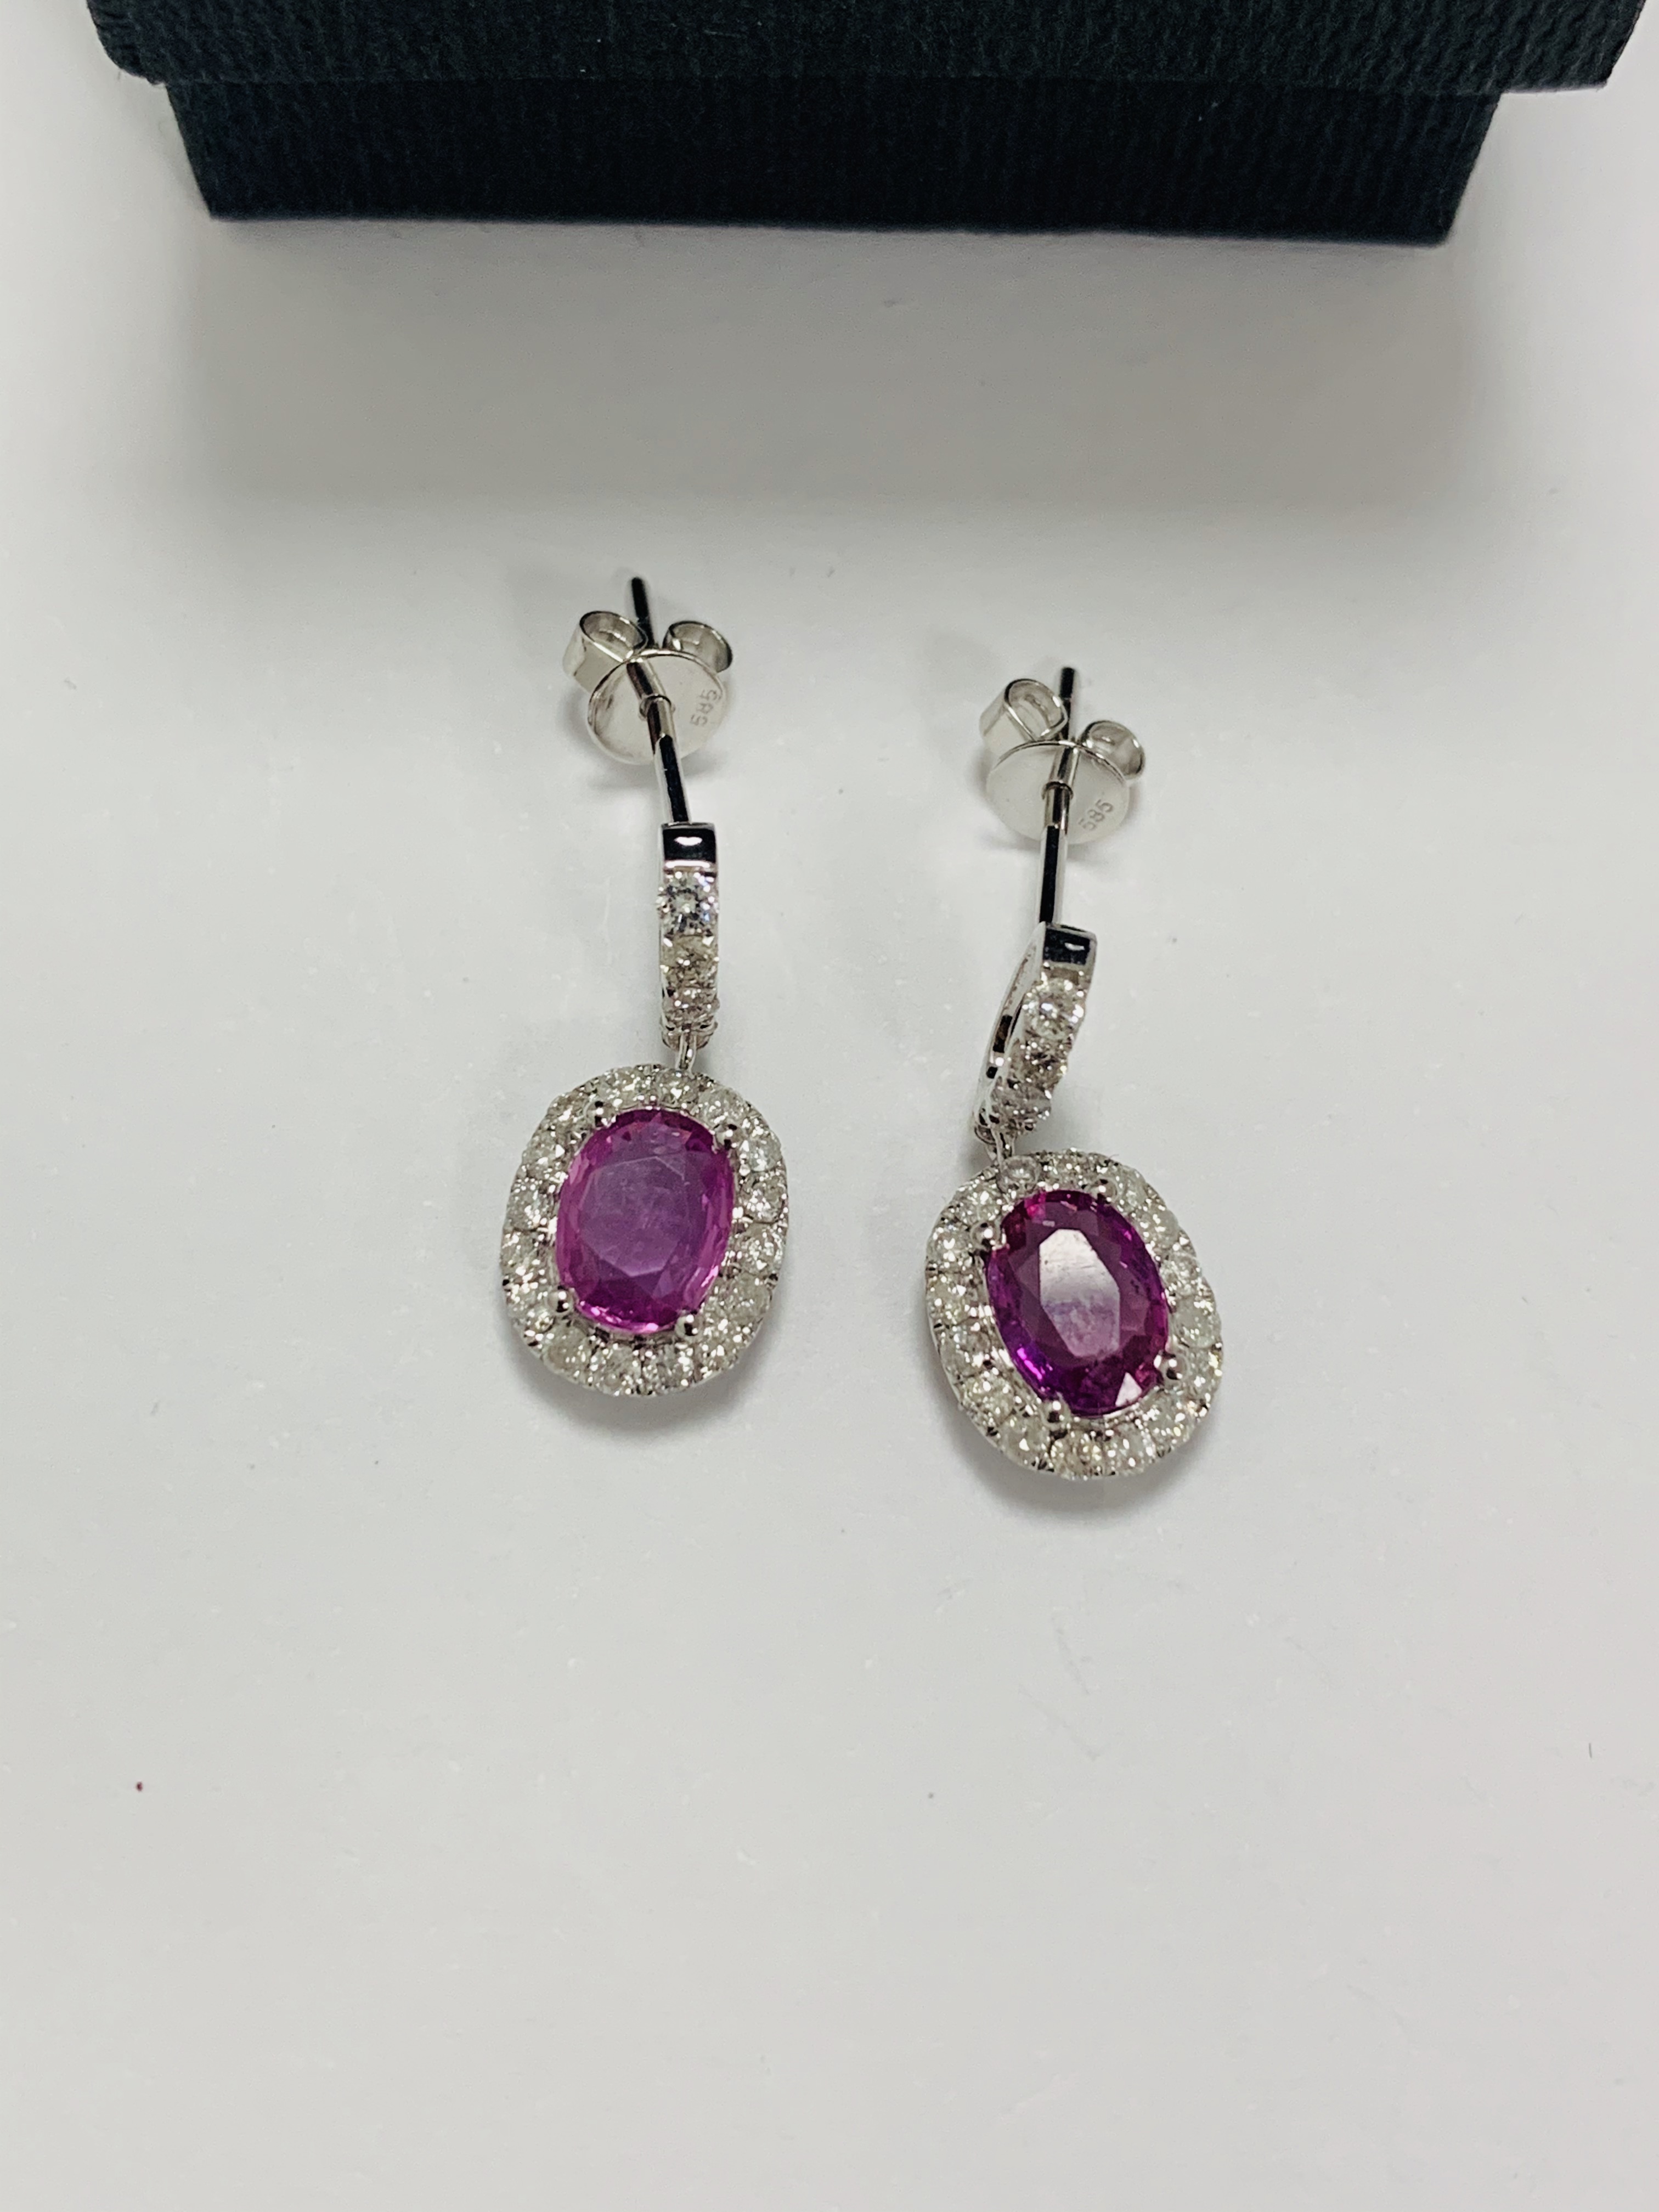 14ct White Gold Sapphire and Diamond drop earrings featuring, 2 oval cut, pink Sapphires (1.66ct TSW - Image 3 of 9